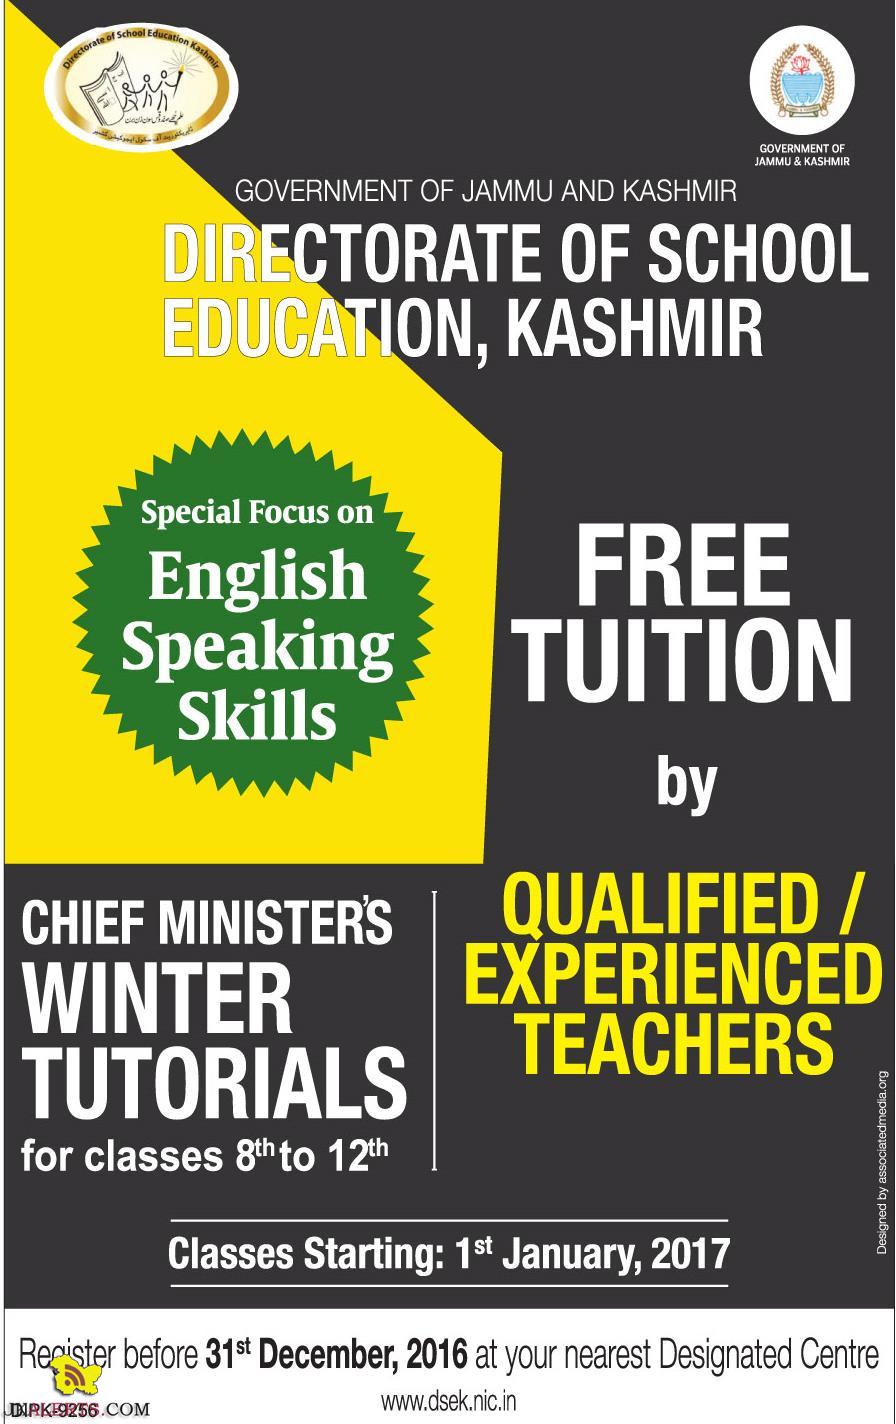 Chief Minister's Winter Tutorials for Classes 8th to 12th Free Tuition